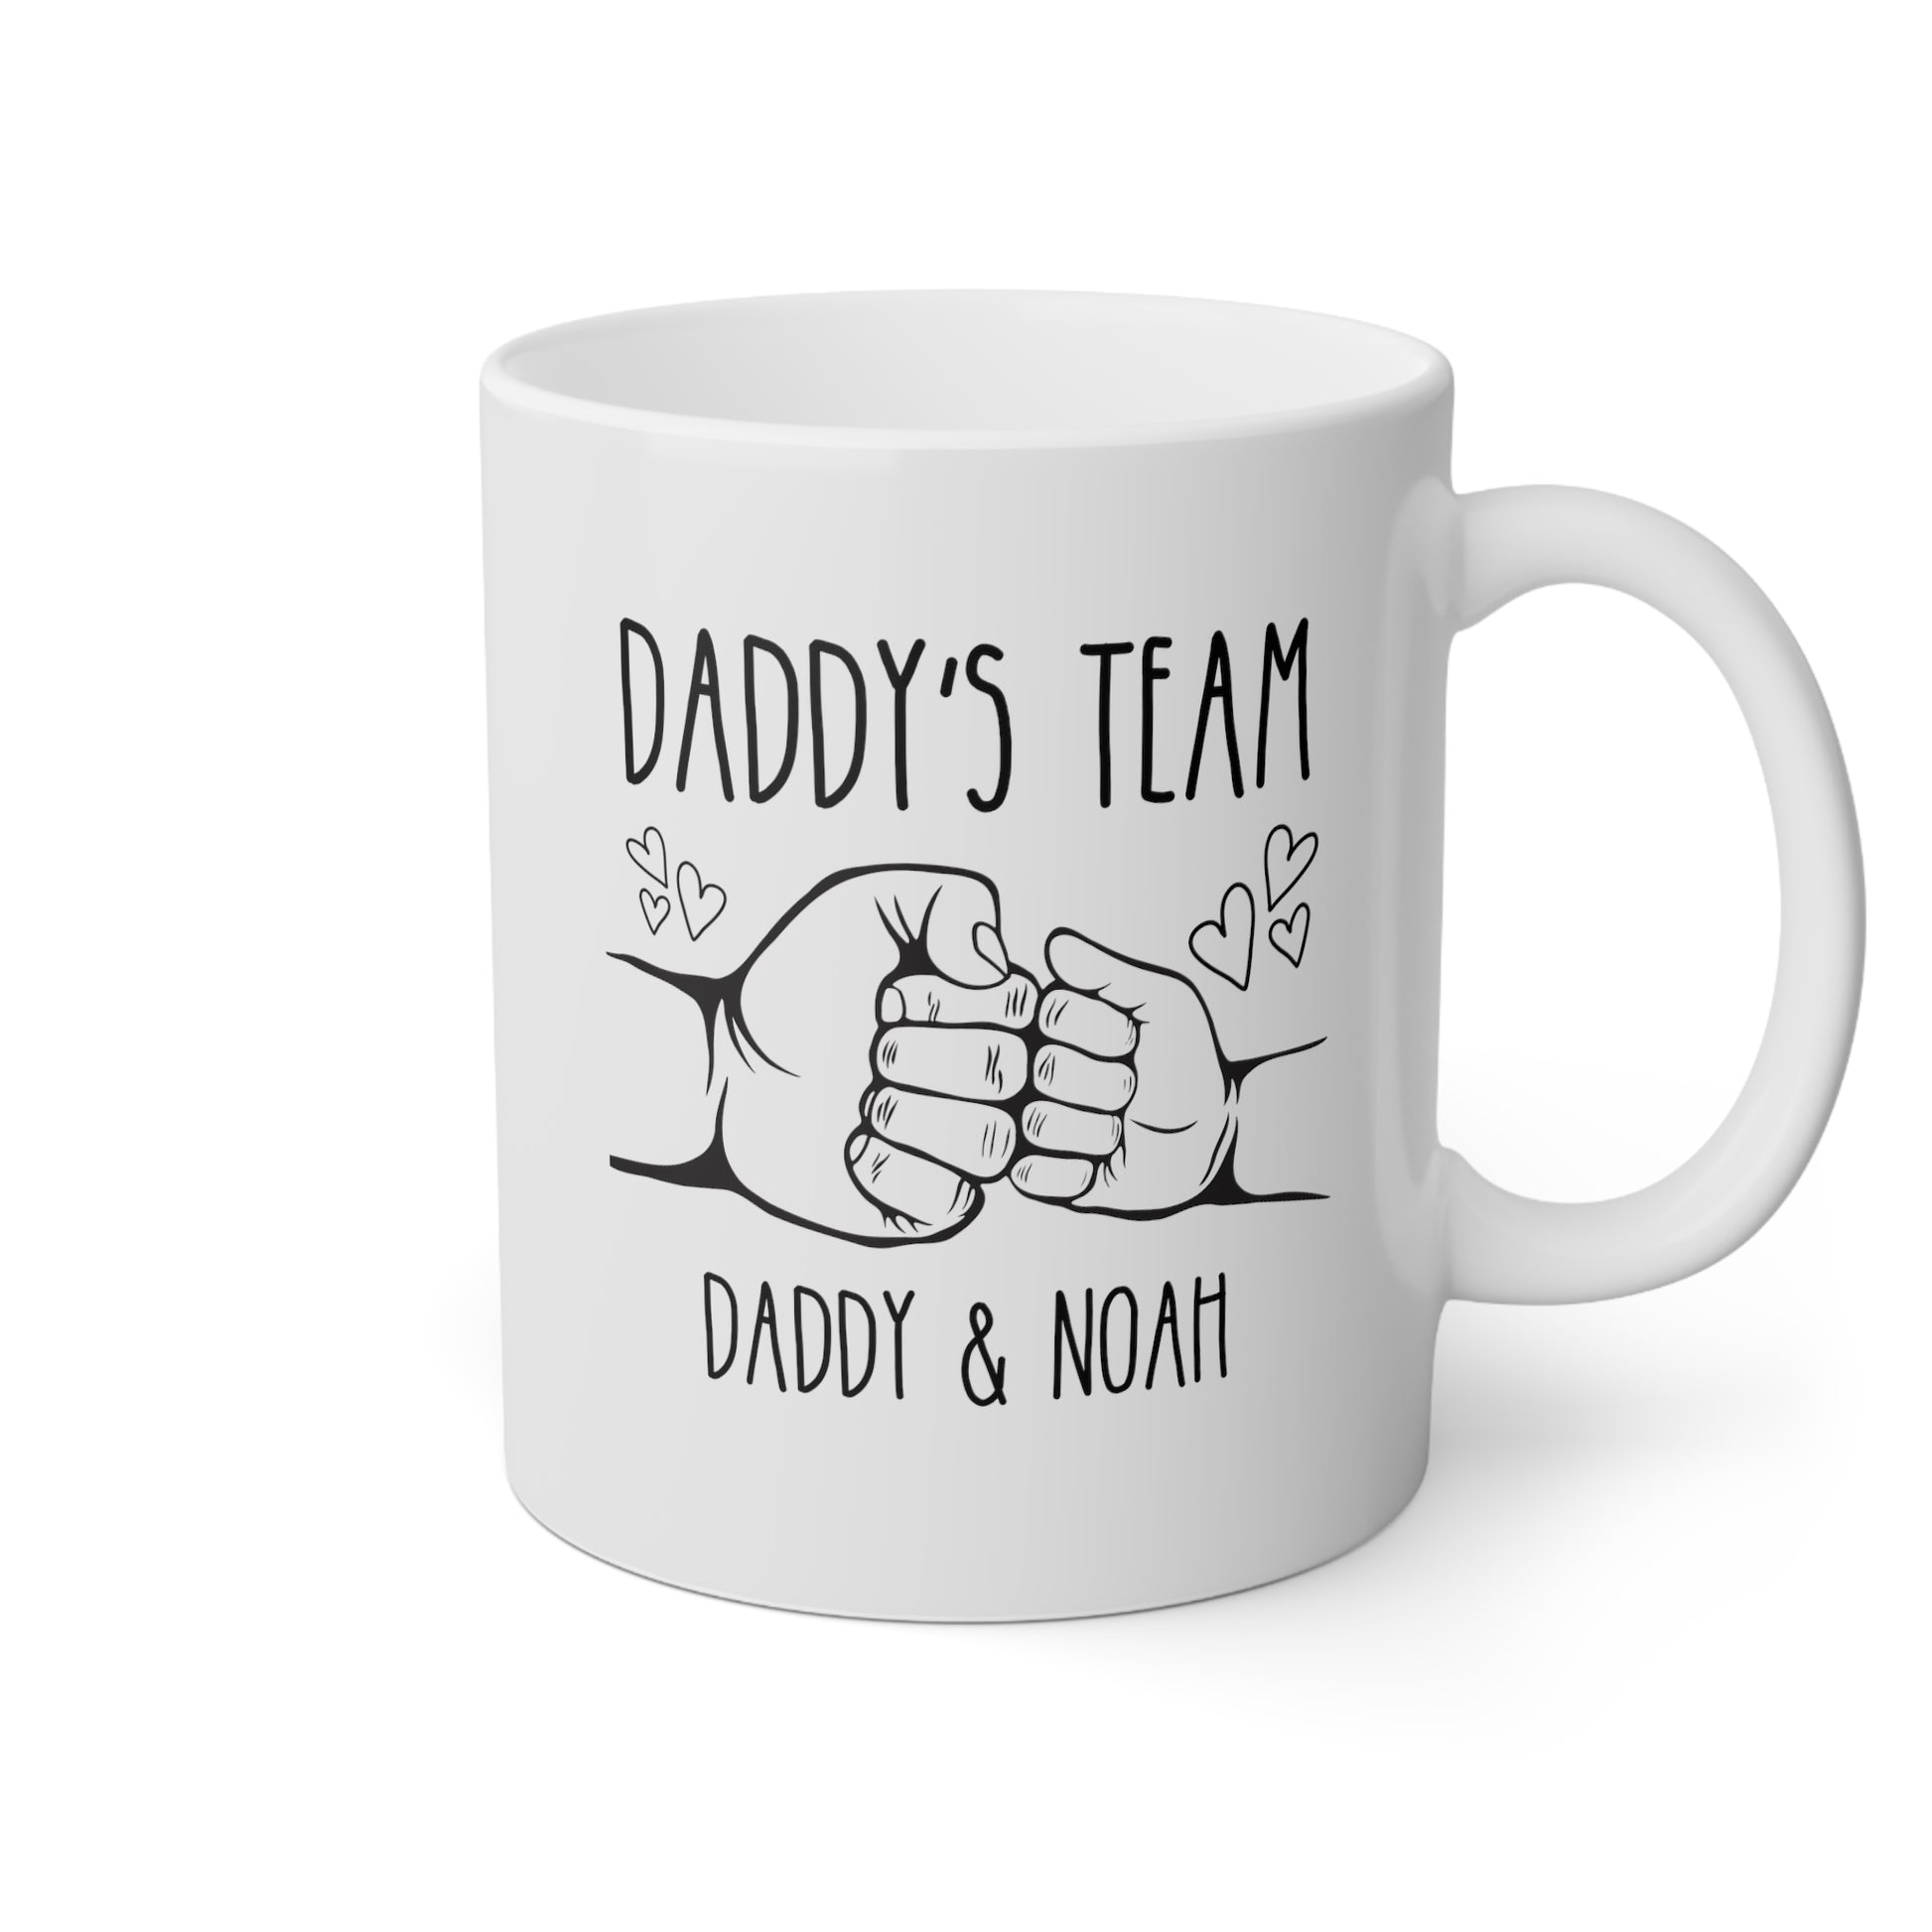 Daddy's Team 11oz white funny large coffee mug gift for dad father's day from kids name customize personalize grandfather fist bump hearts waveywares wavey wares wavywares wavy wares